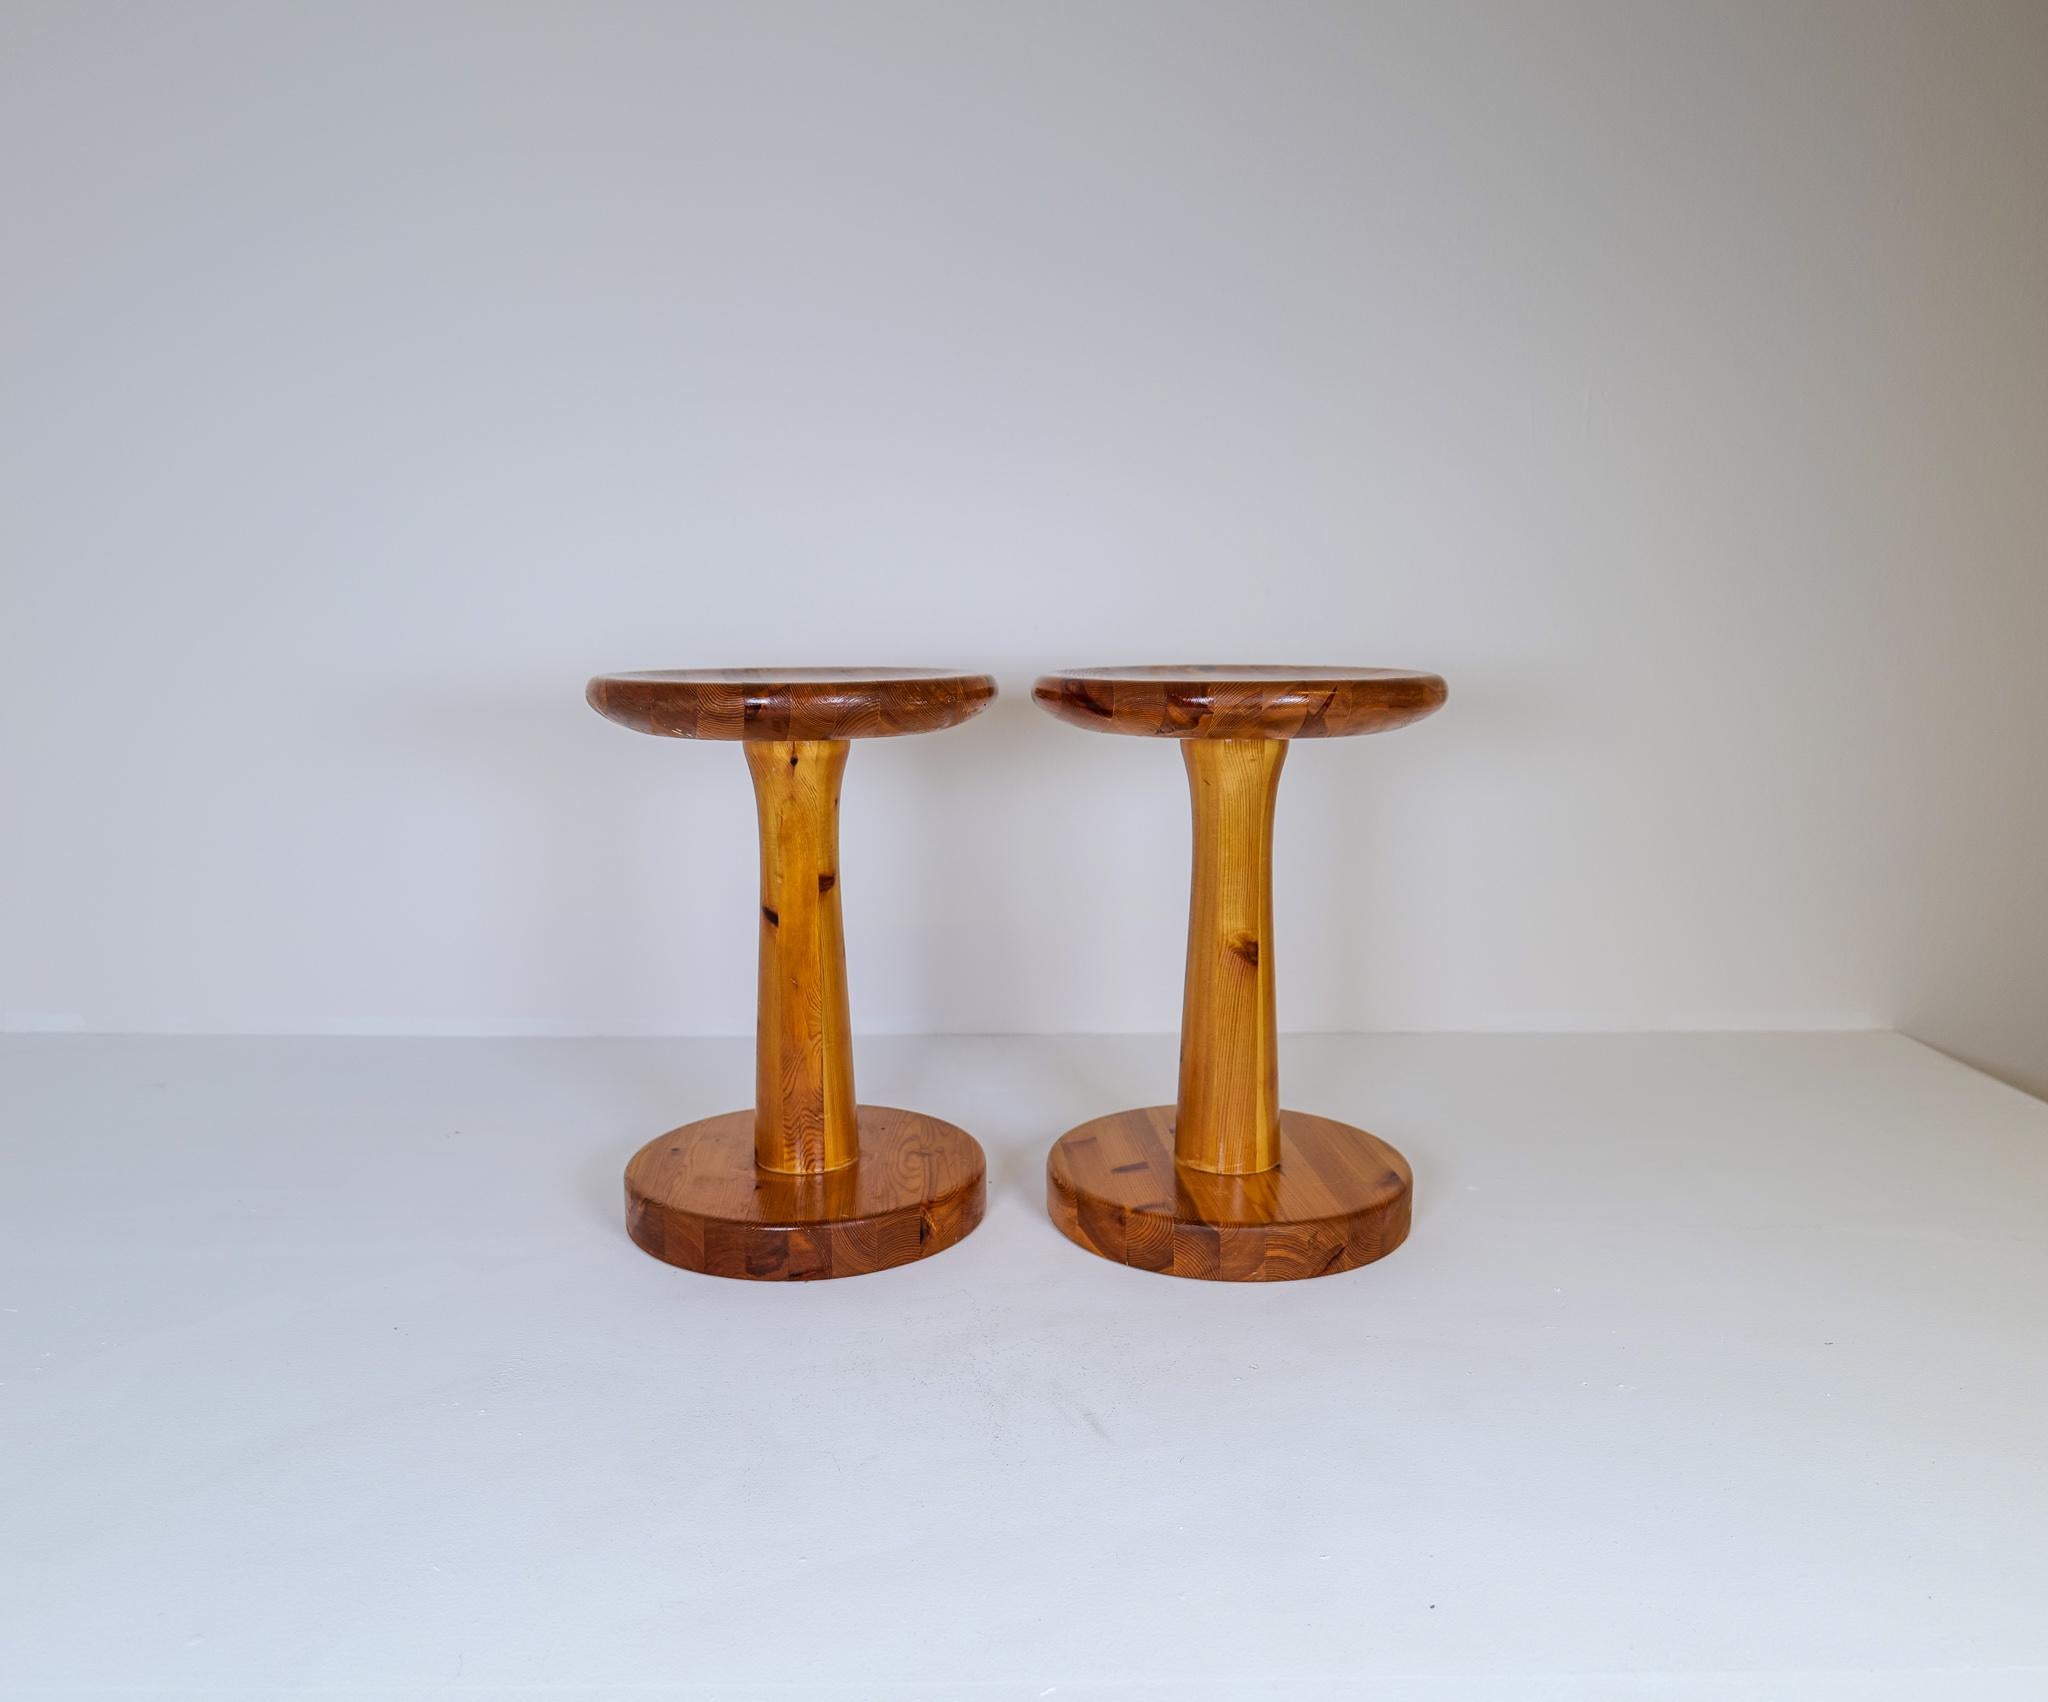 Scandinavian Modern Minimalistic Pair of Pine Stools Sweden, 1970s In Good Condition For Sale In Hillringsberg, SE